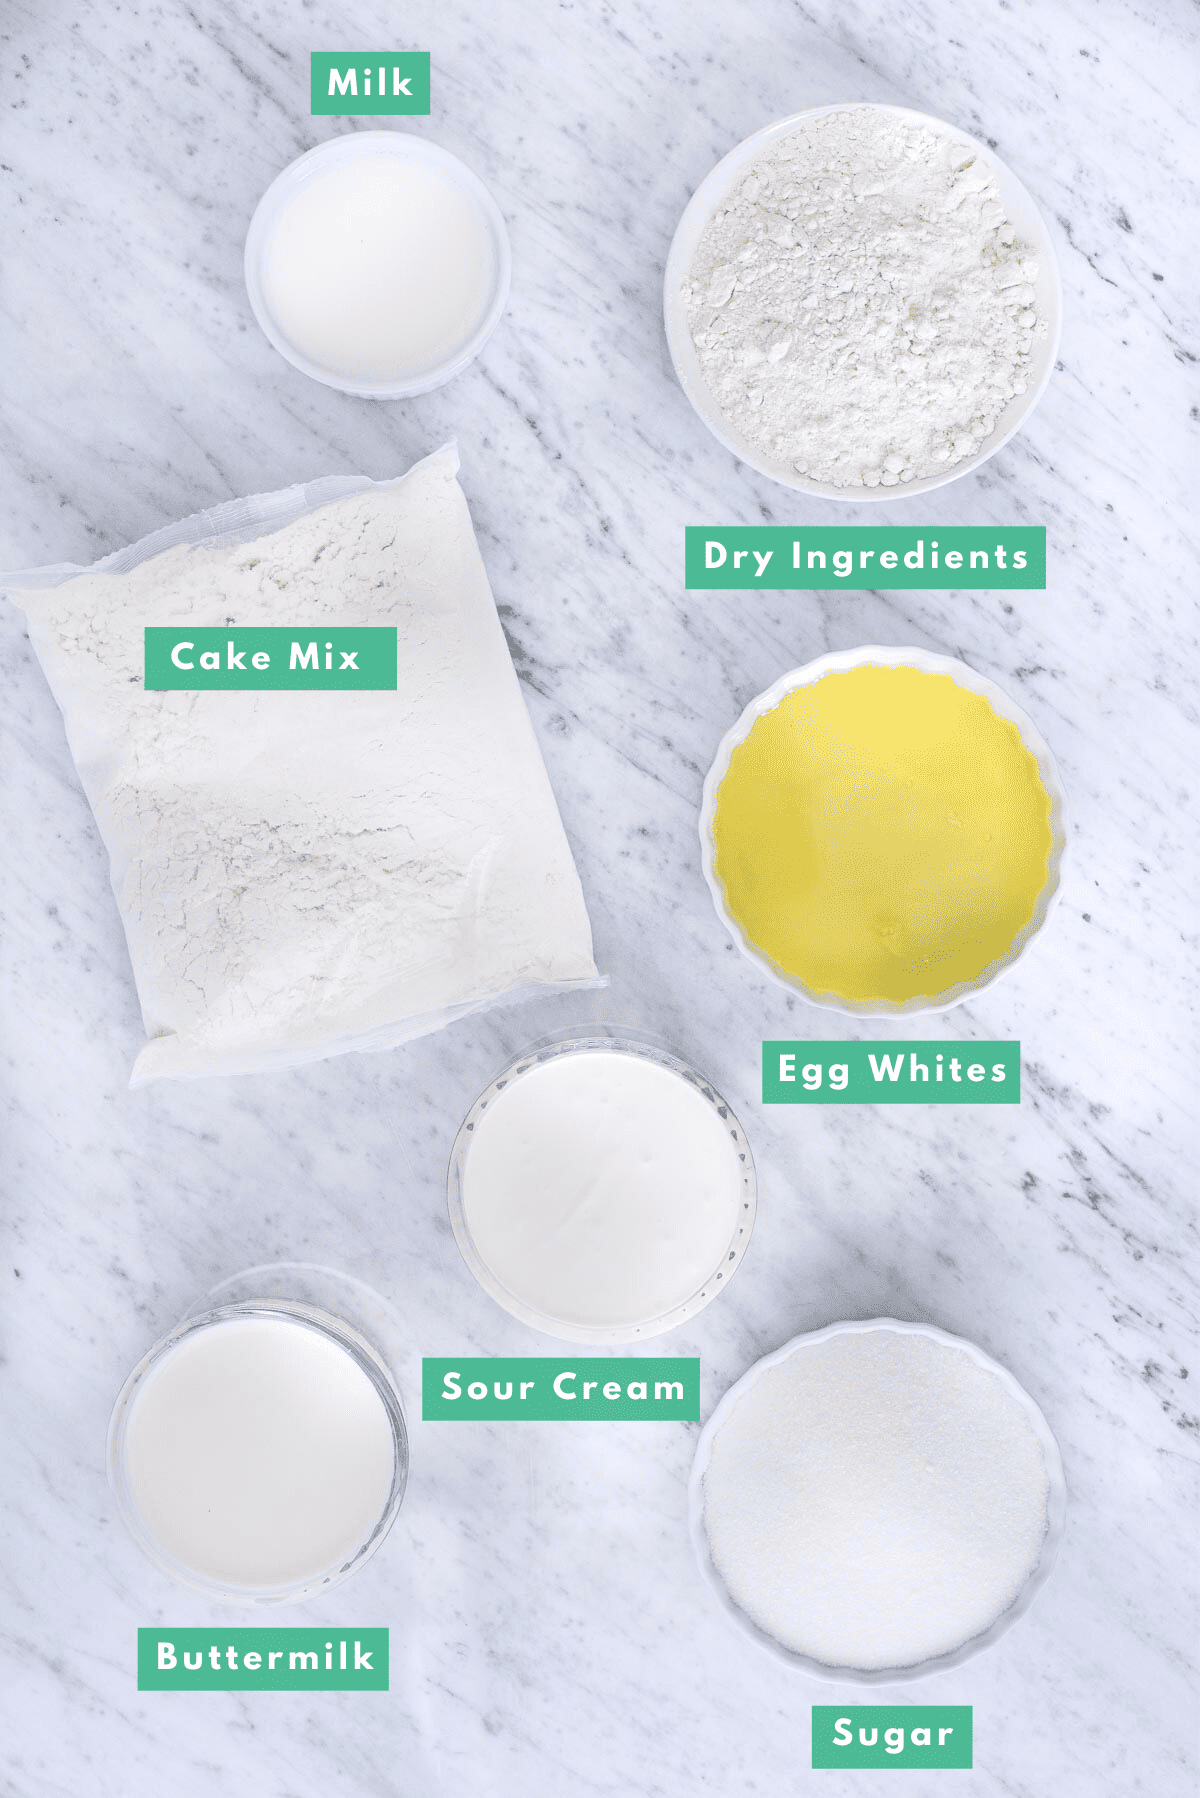 ingredients to make white cake mix from box mix on marble background with text overlay